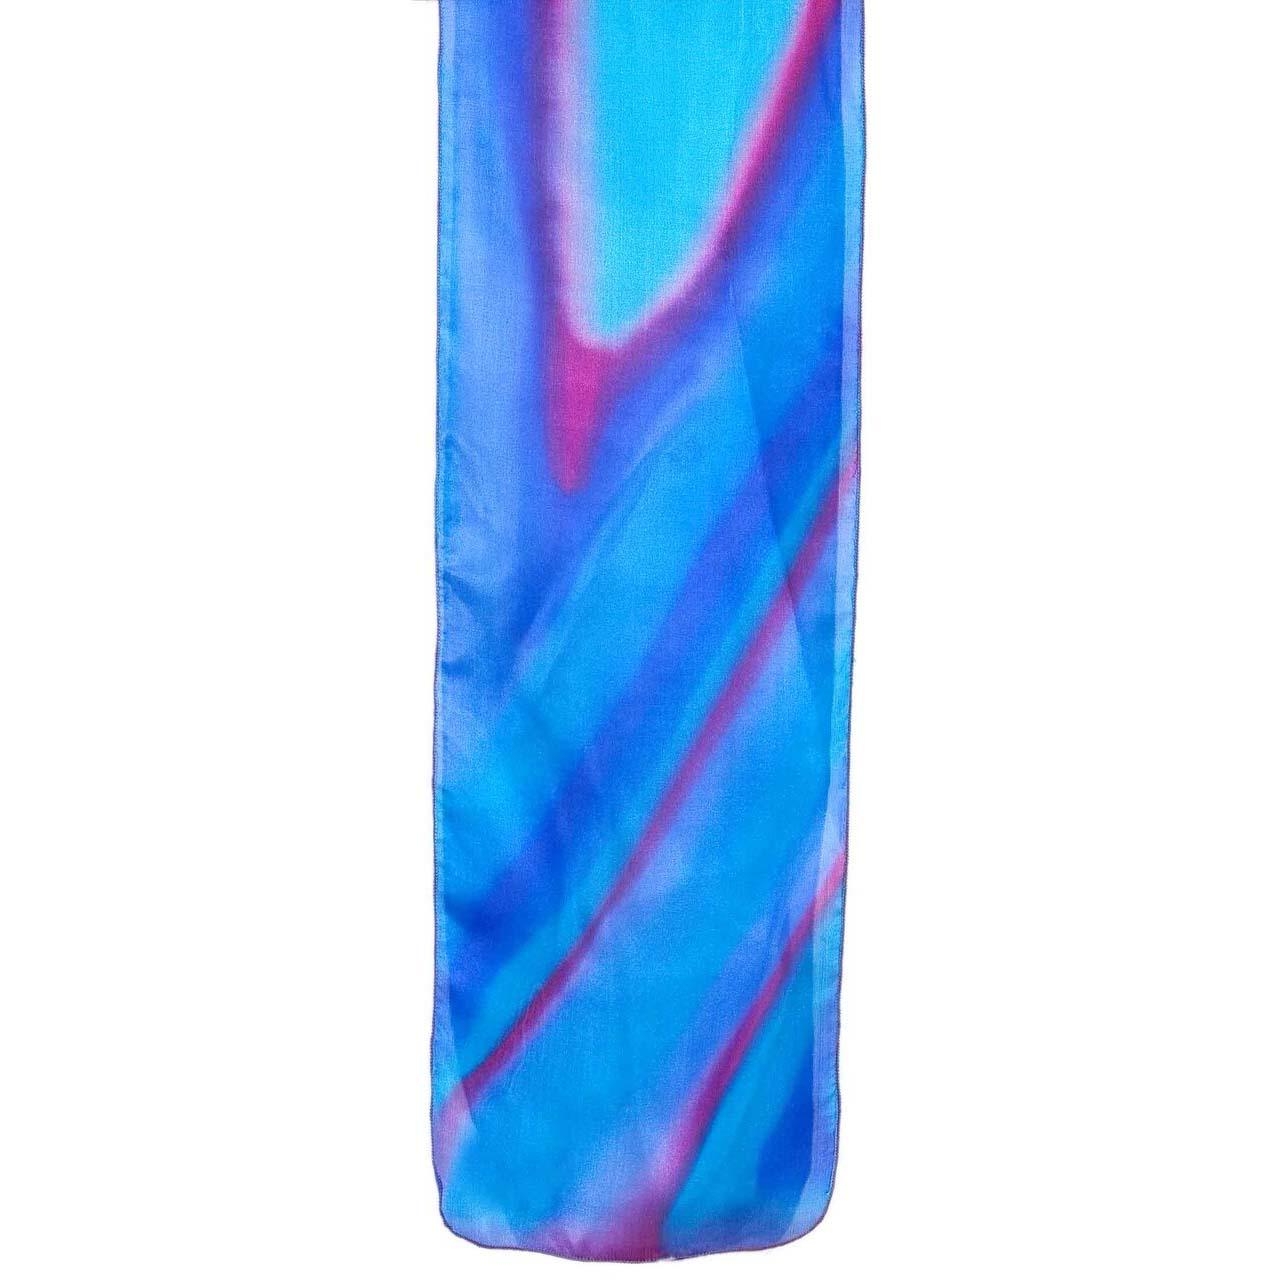 Yair Emanuel Painted Silk Scarf  (Blue and Pink) - 1